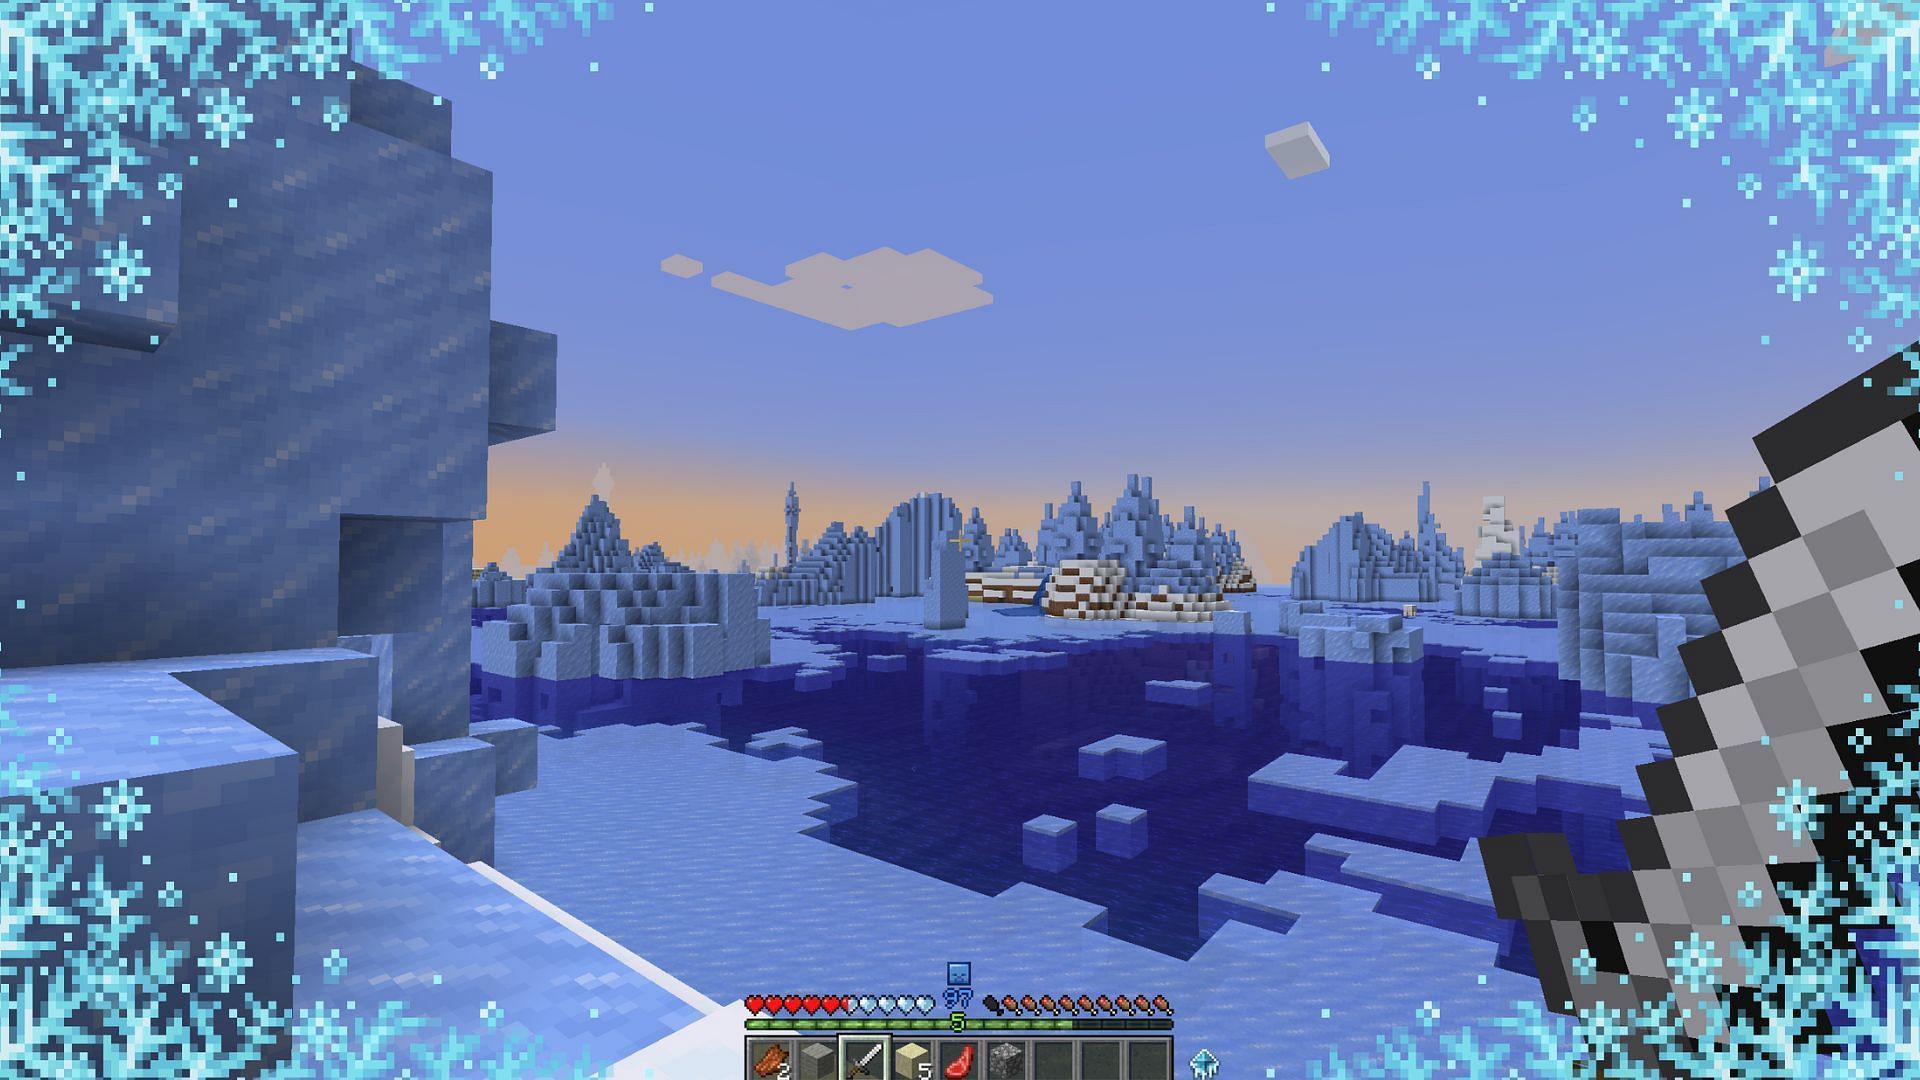 The Cold Sweat mod for Minecraft (